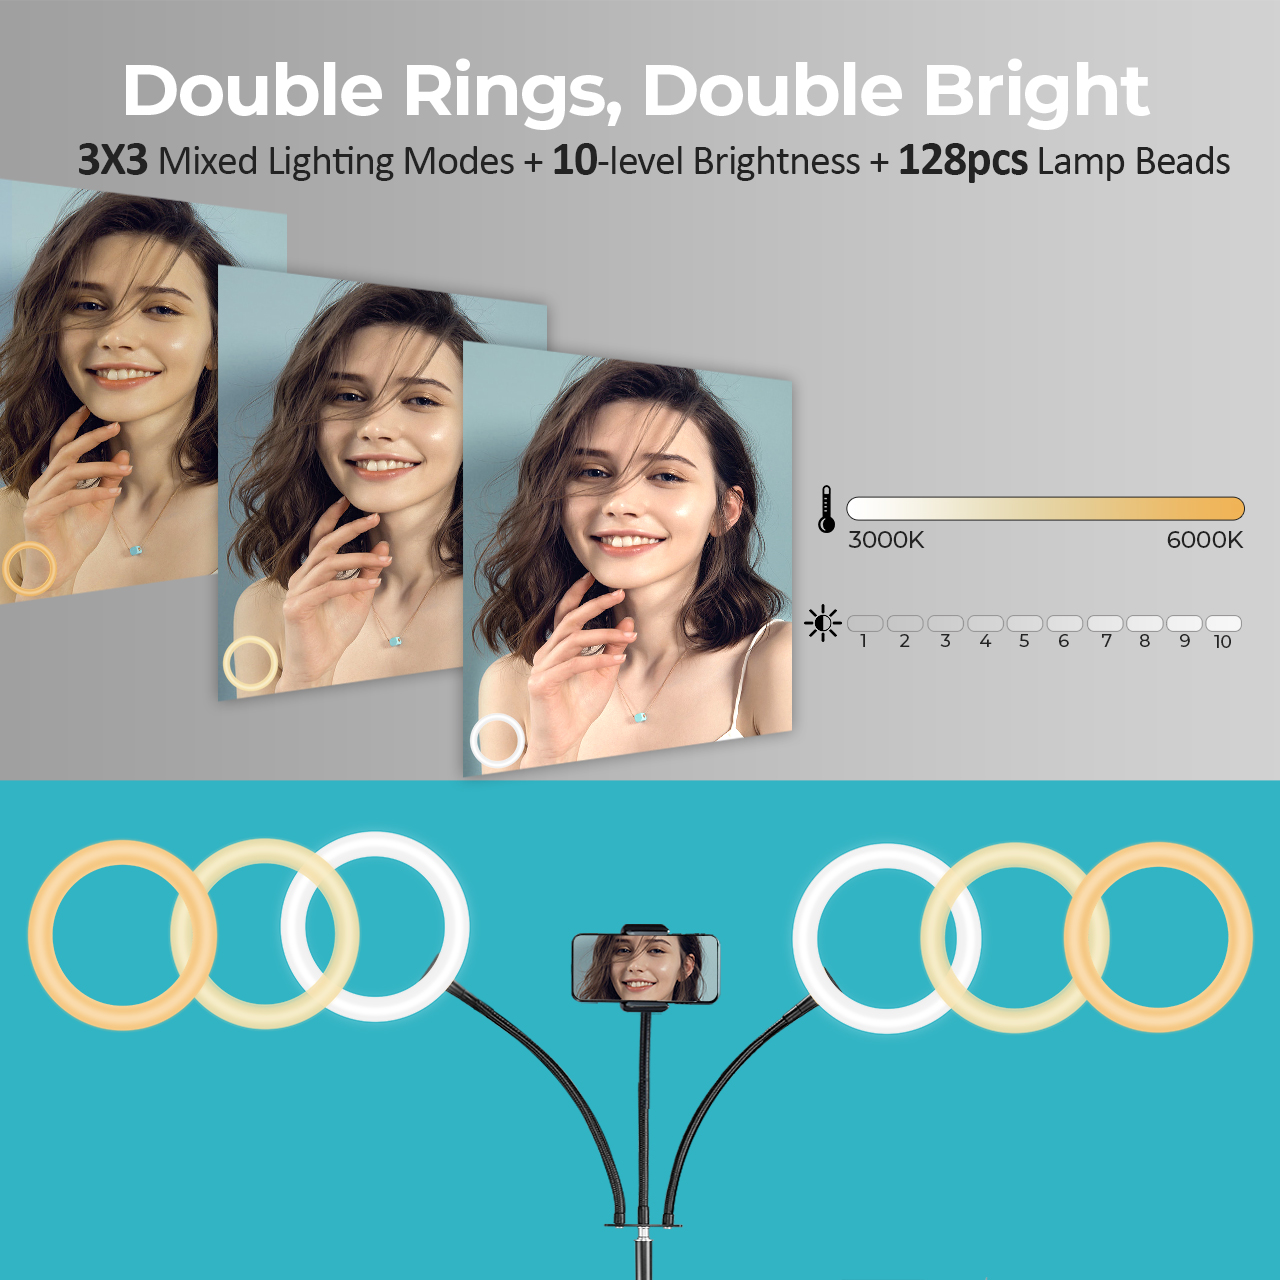 Victsing Double 8" LED Ring Light, Selfie Ring light with Adjustable Tripod & Phone Holder & Remote Shutter for Live Stream, Makeup, Photo - image 2 of 7